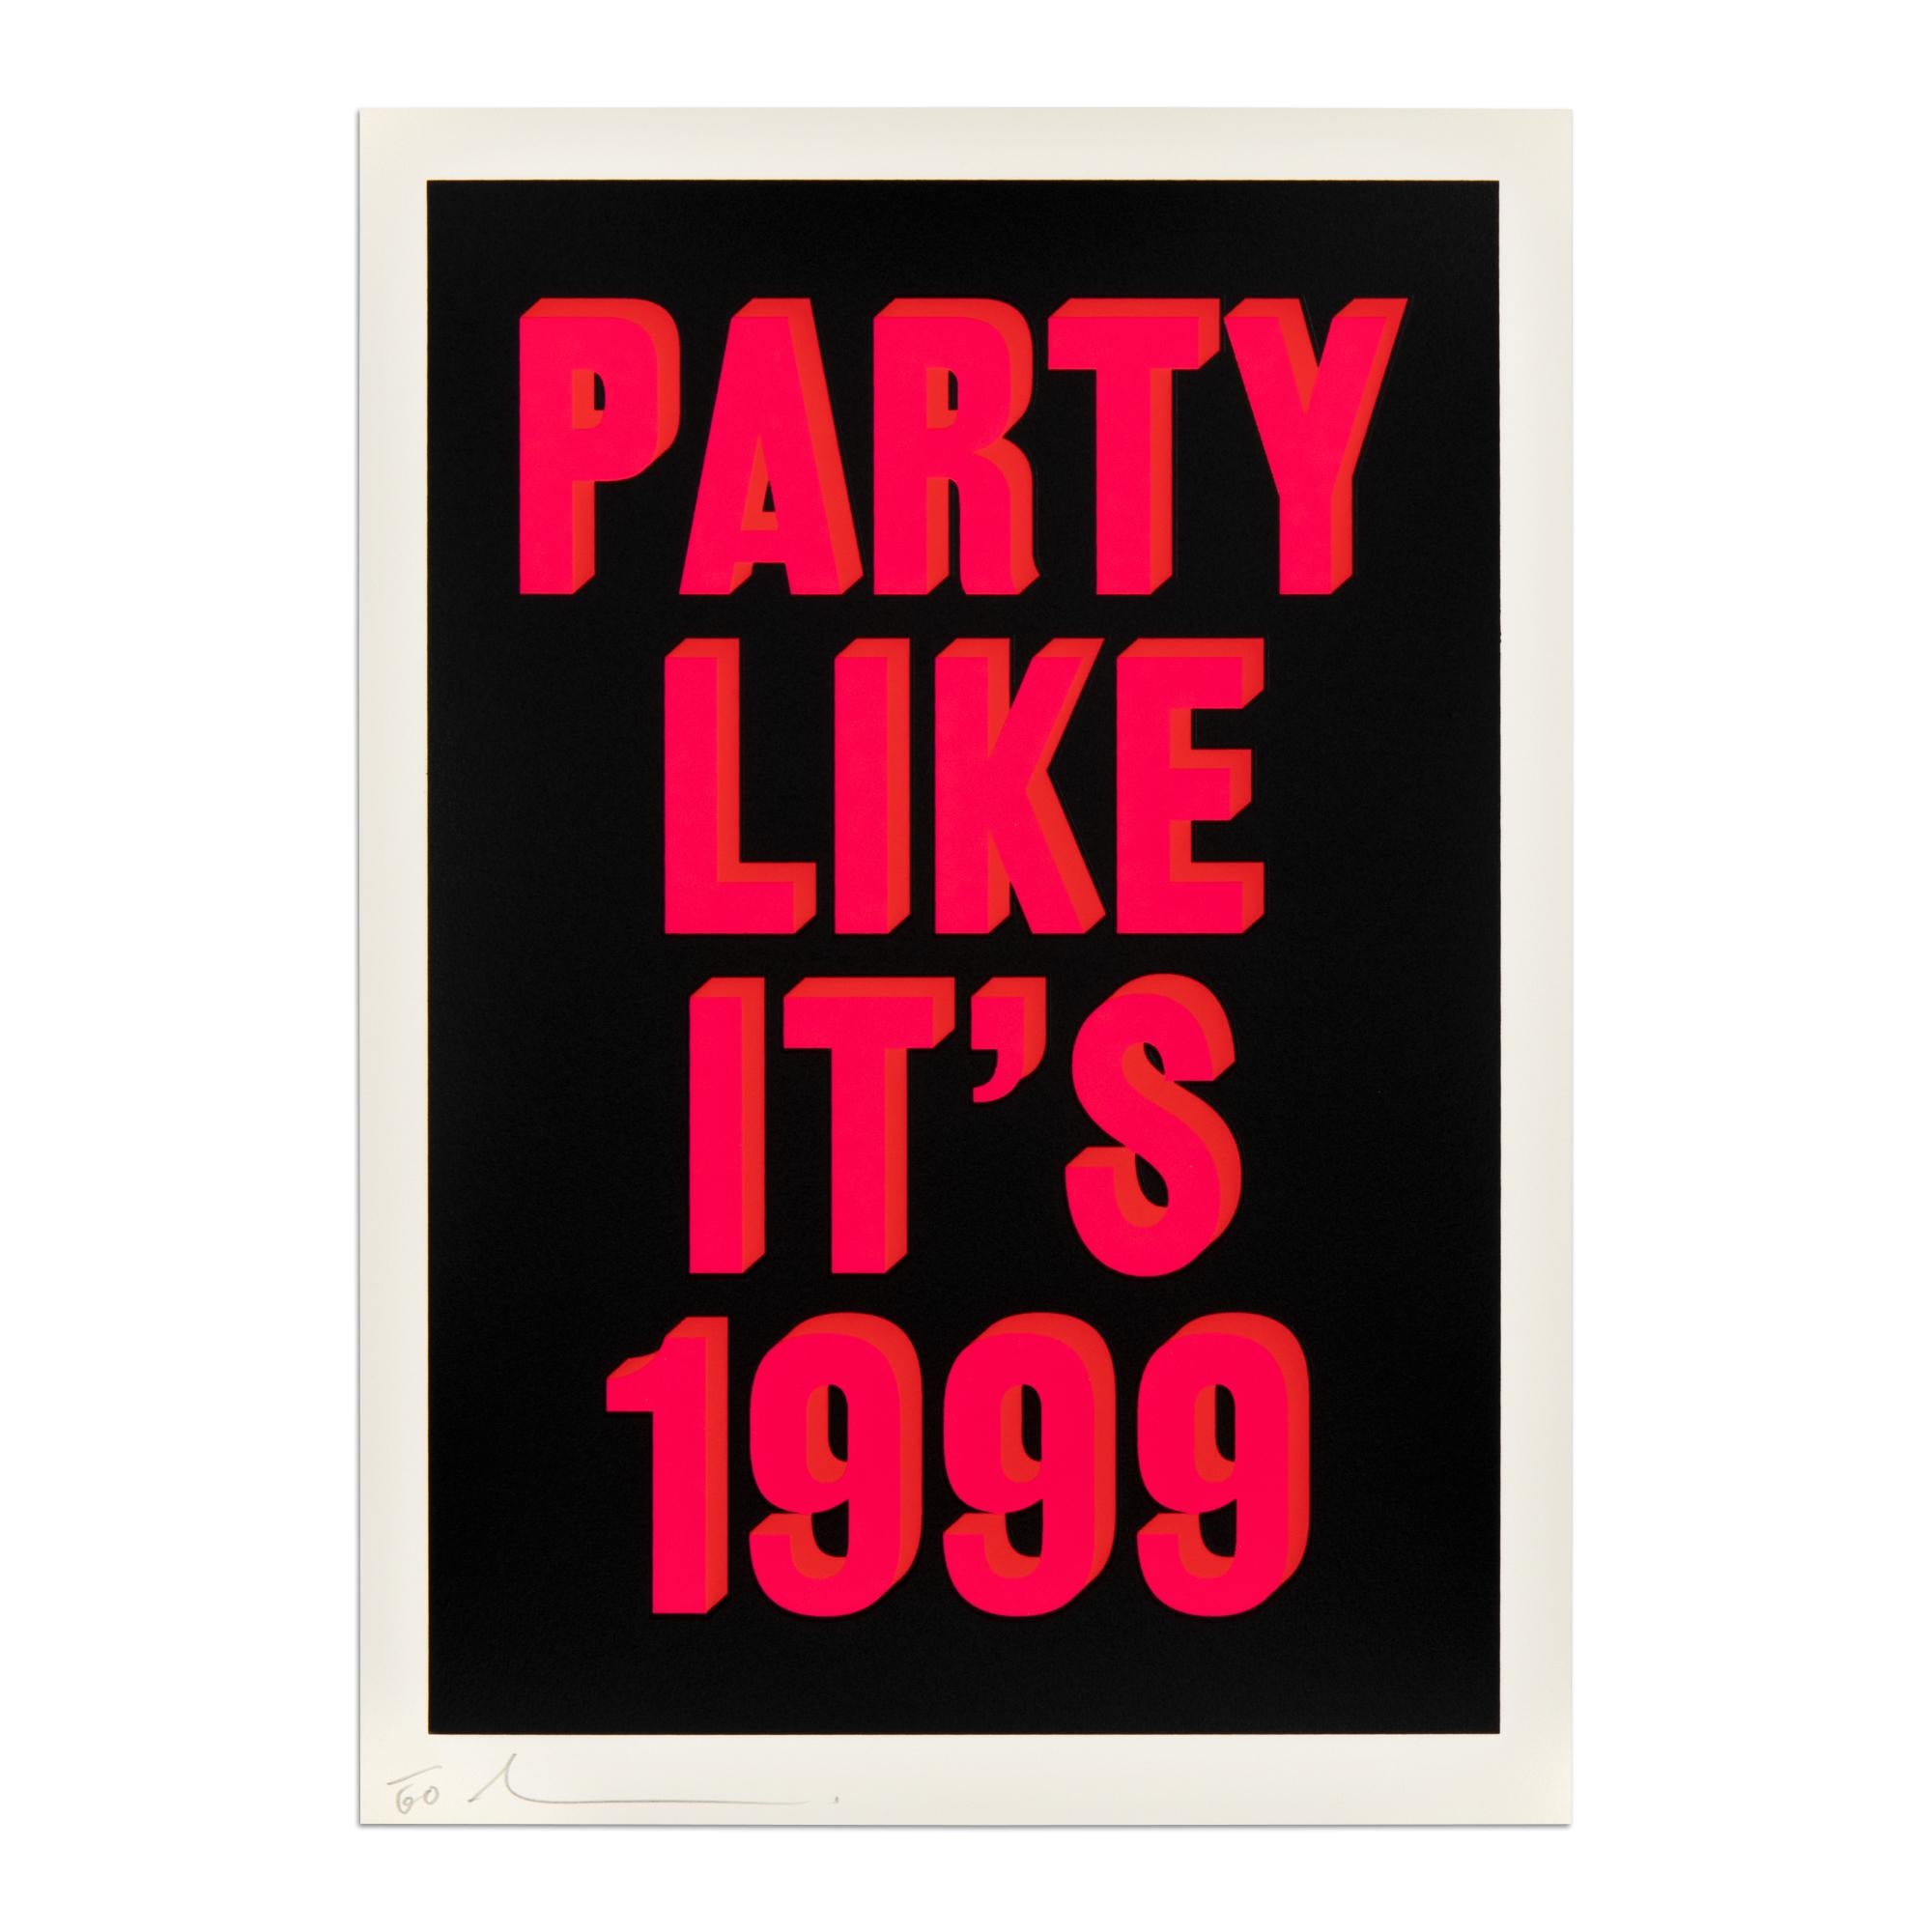 Dave Buonaguidi
Party Like It's 1999, 2021
Medium: Screenprint on paper
Dimensions: 42 x 29.7 cm
Edition of 60: Hand-signed and numbered in pencil